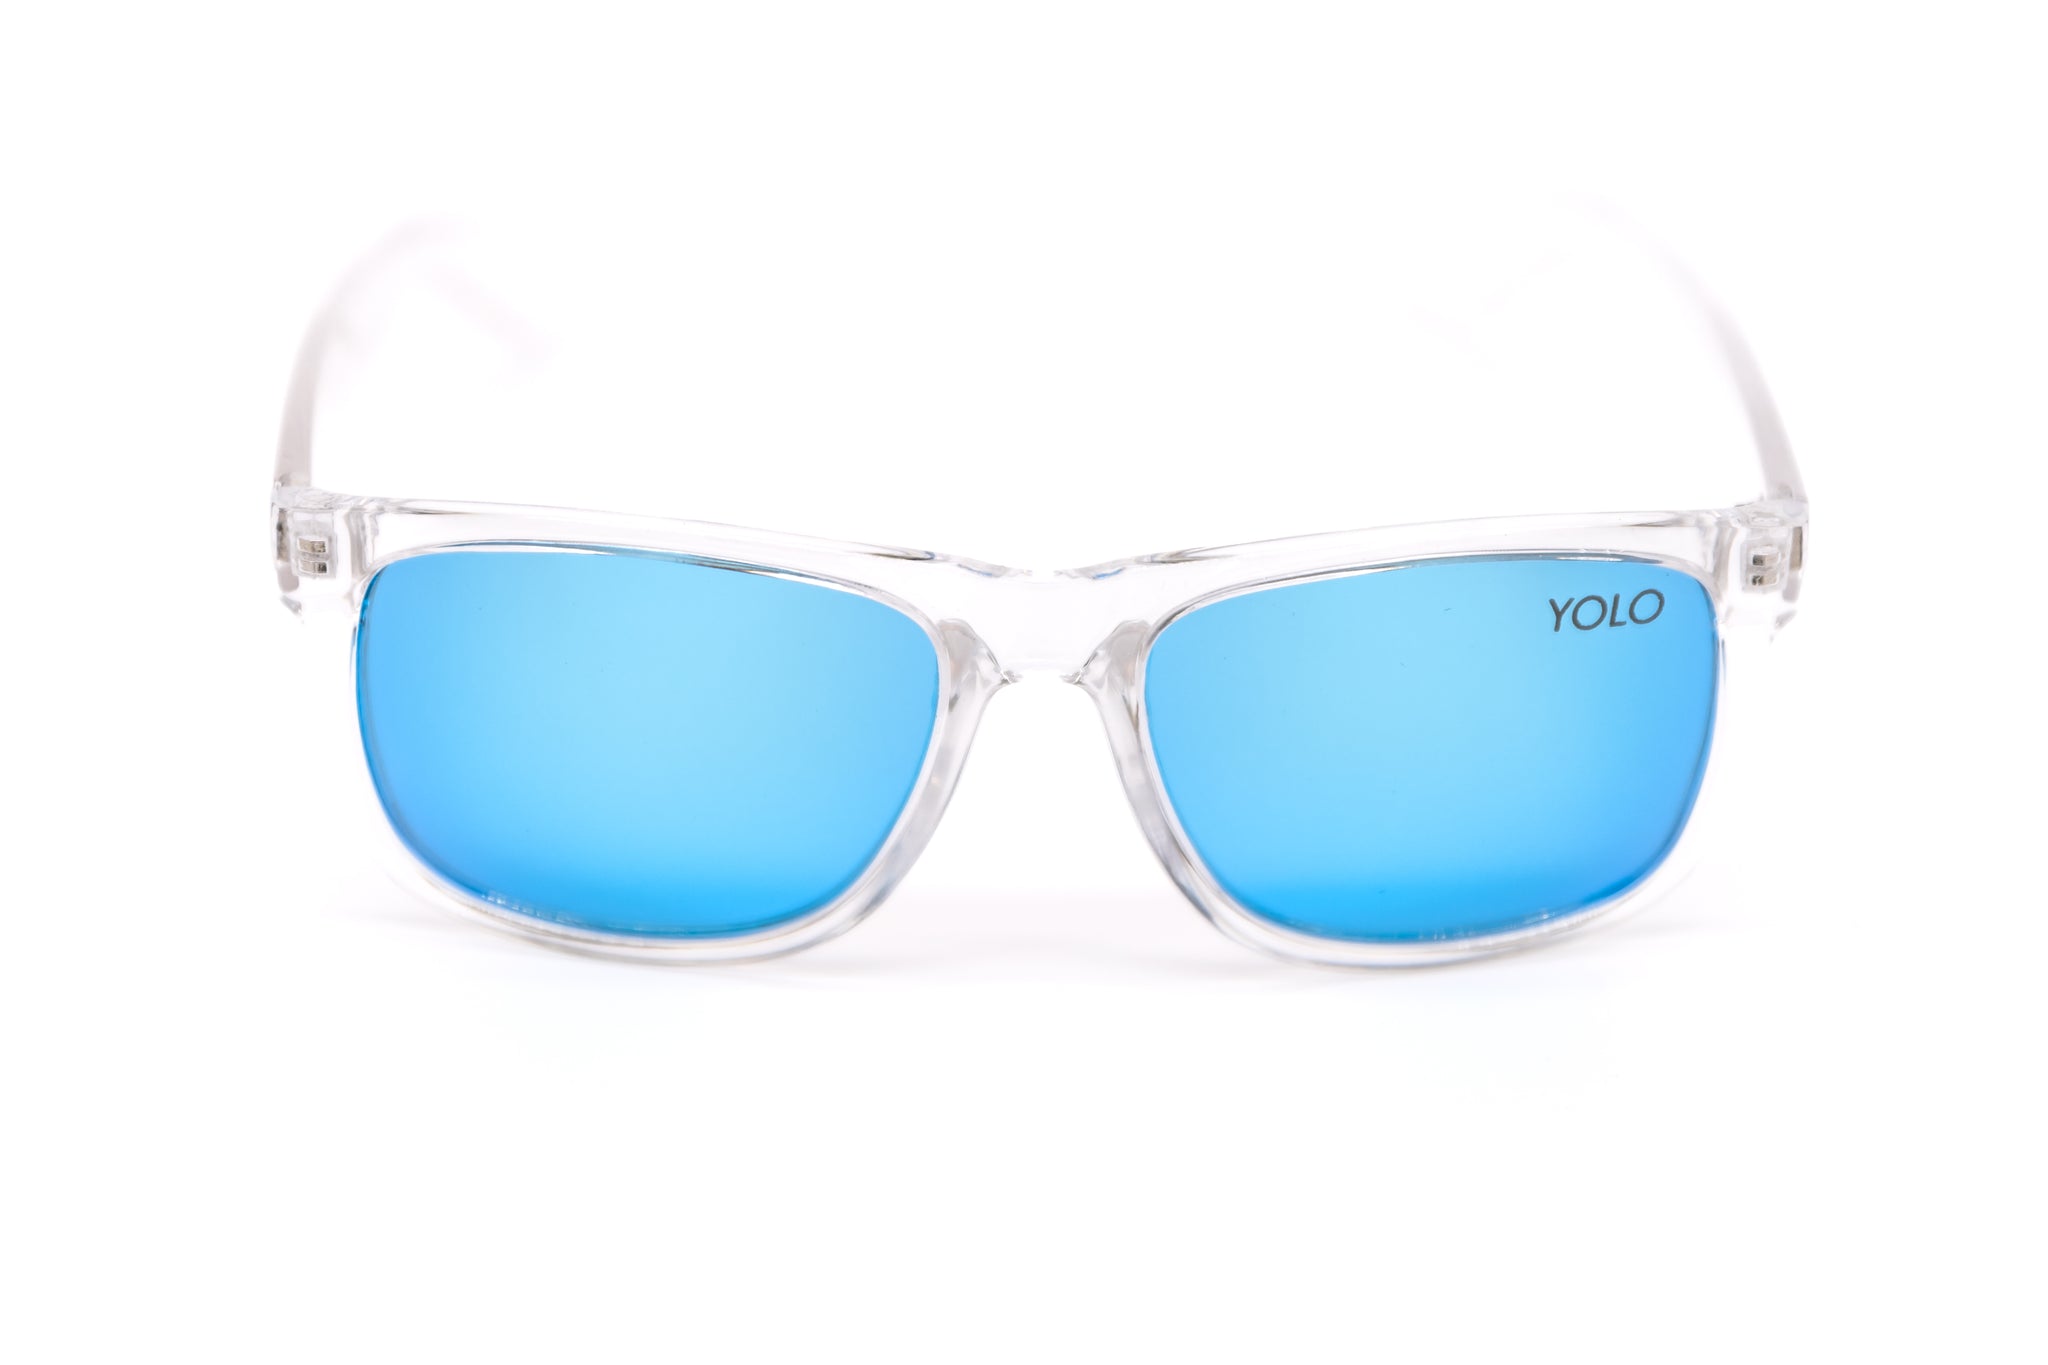 Framed Square Sunglasses – Sport Yolo Clear Polarized with Mirrored Eyewear Lens